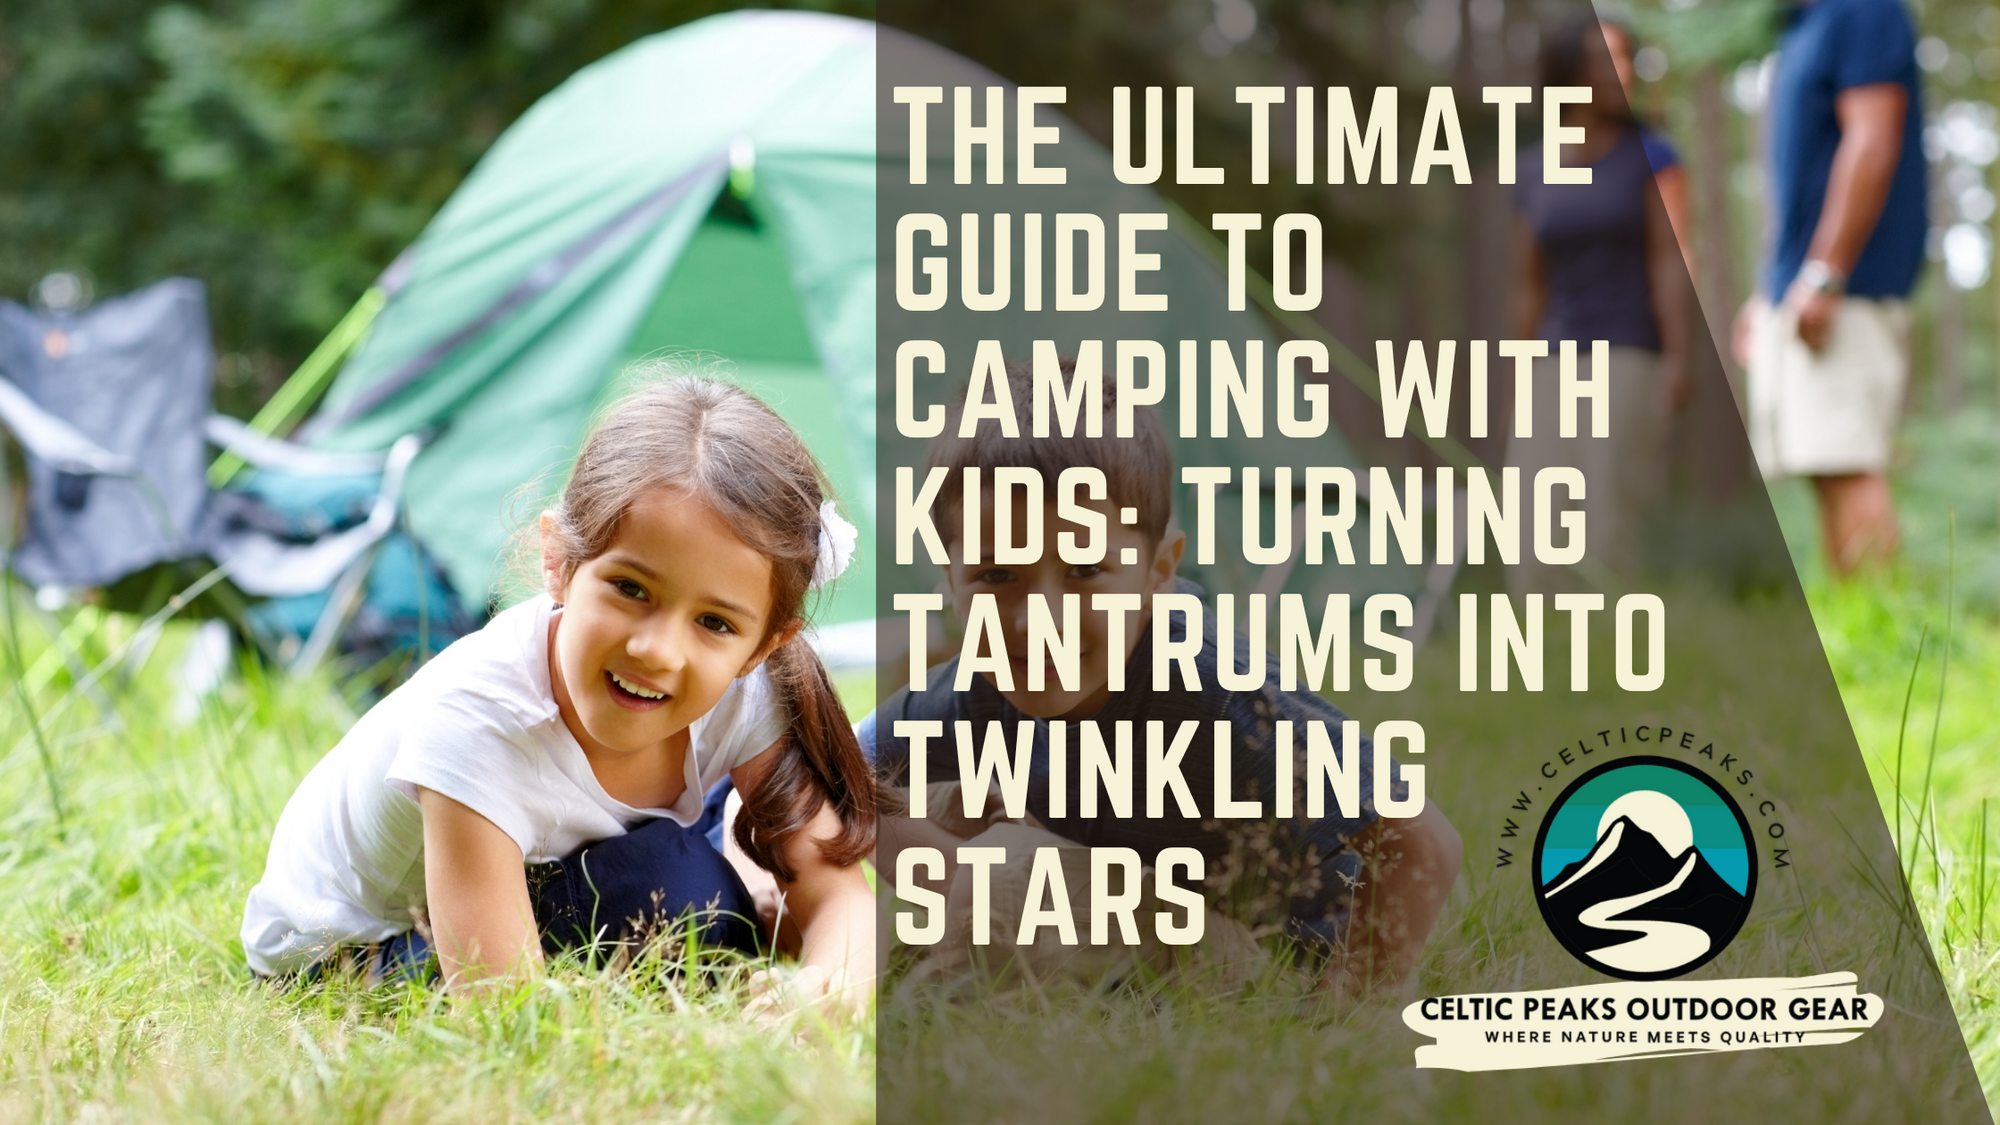 The Ultimate Guide to Camping with Kids: Turning Tantrums into Twinkling Stars